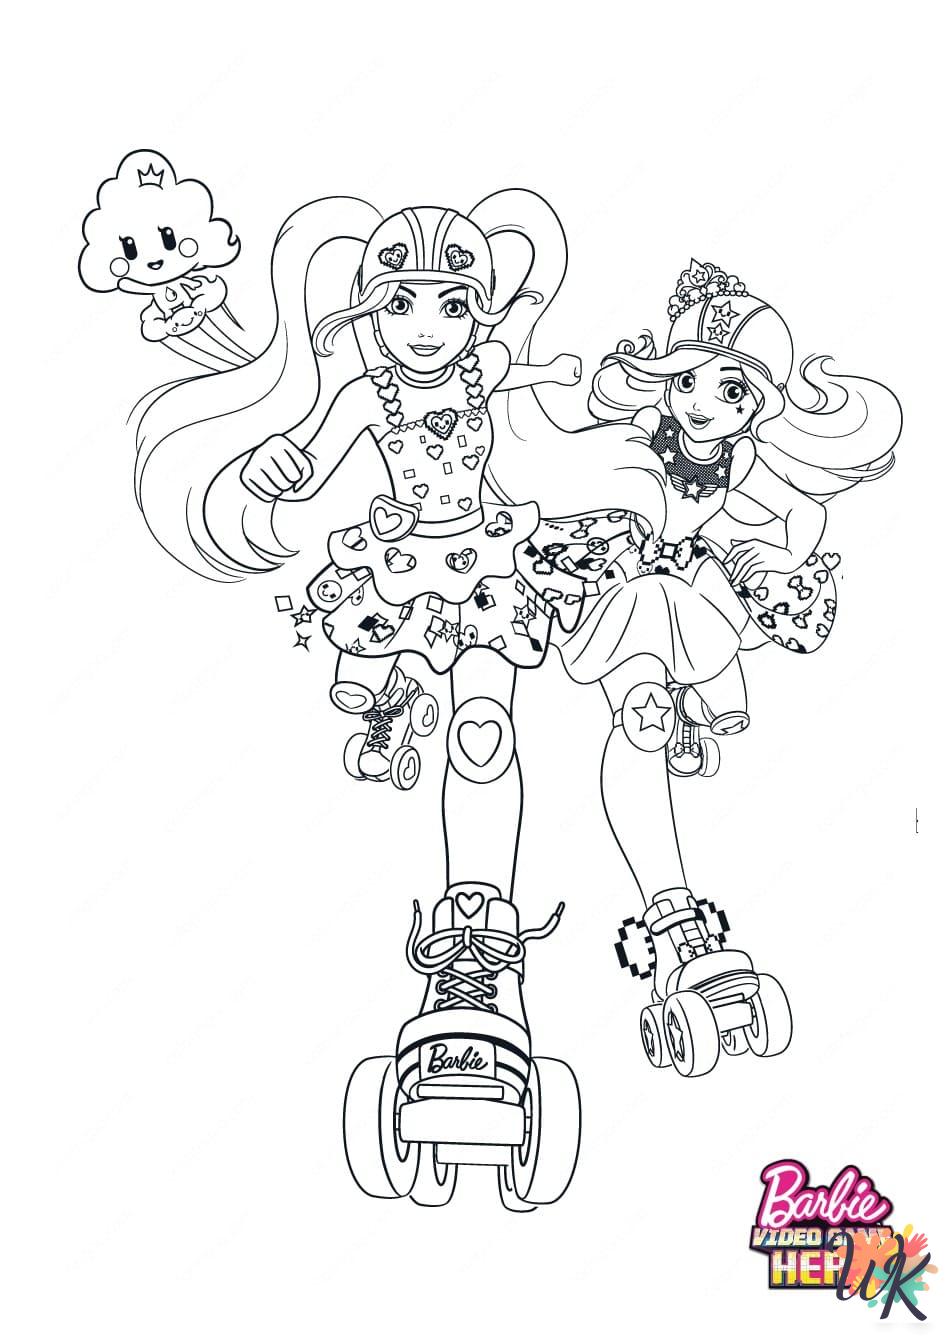 detailed Barbie coloring pages for adults